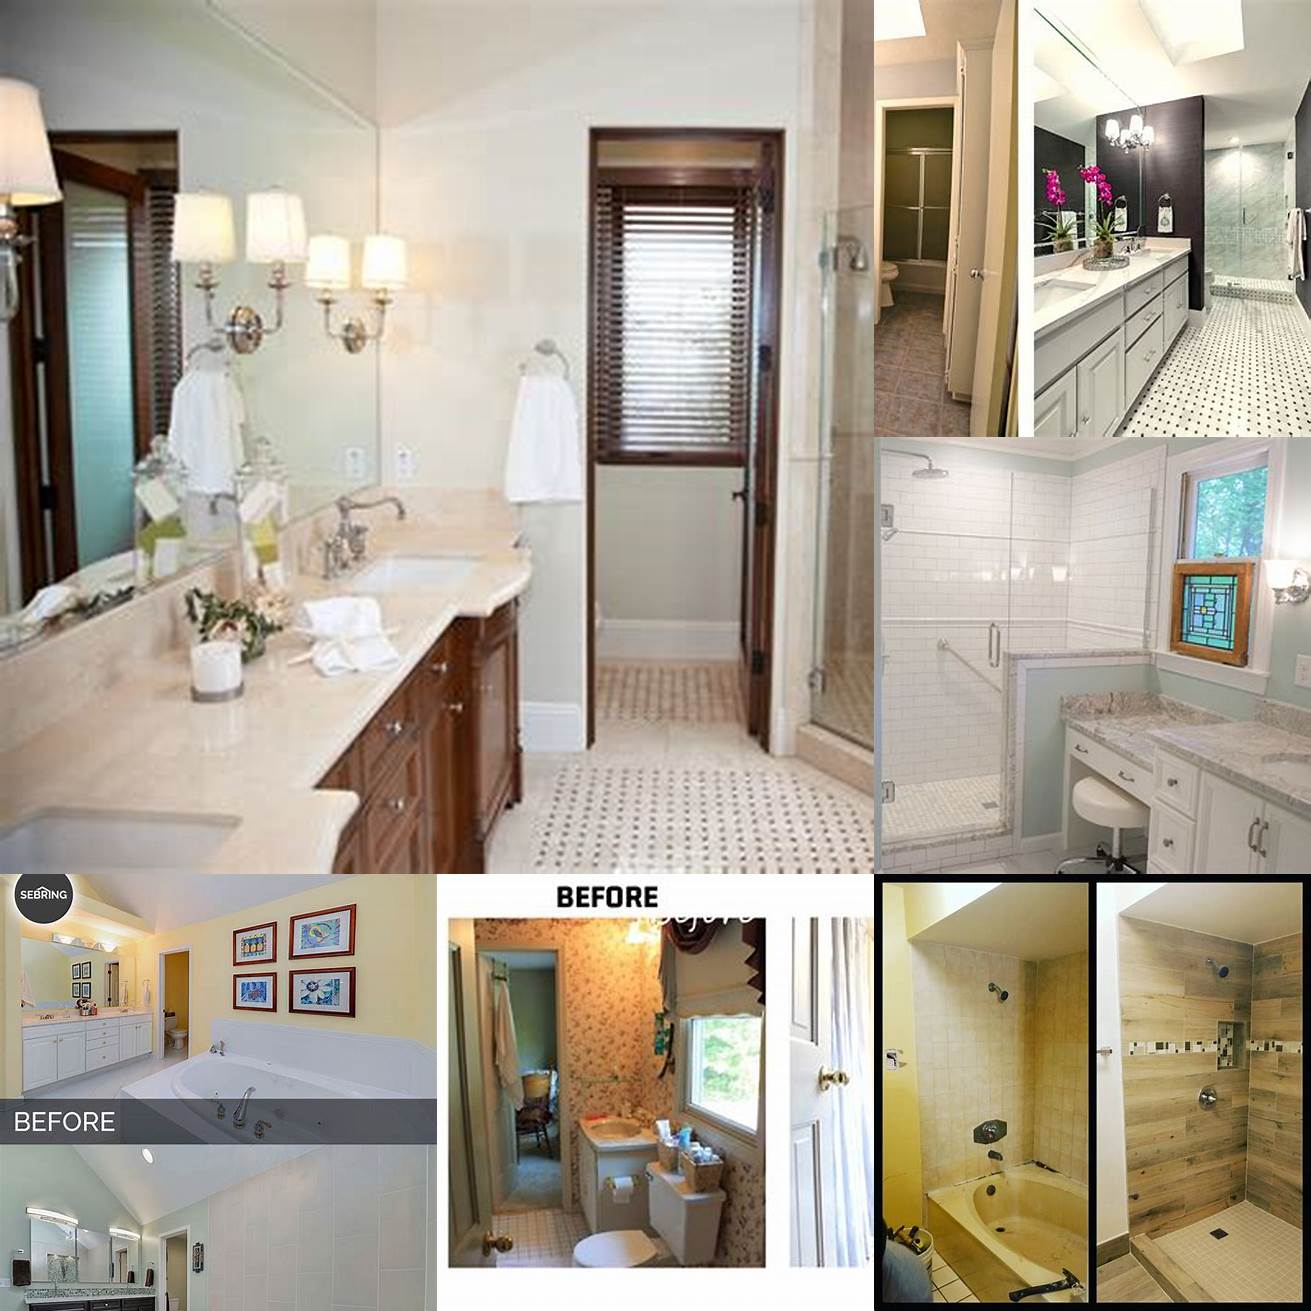 Before-and-after photos of bathroom renovations